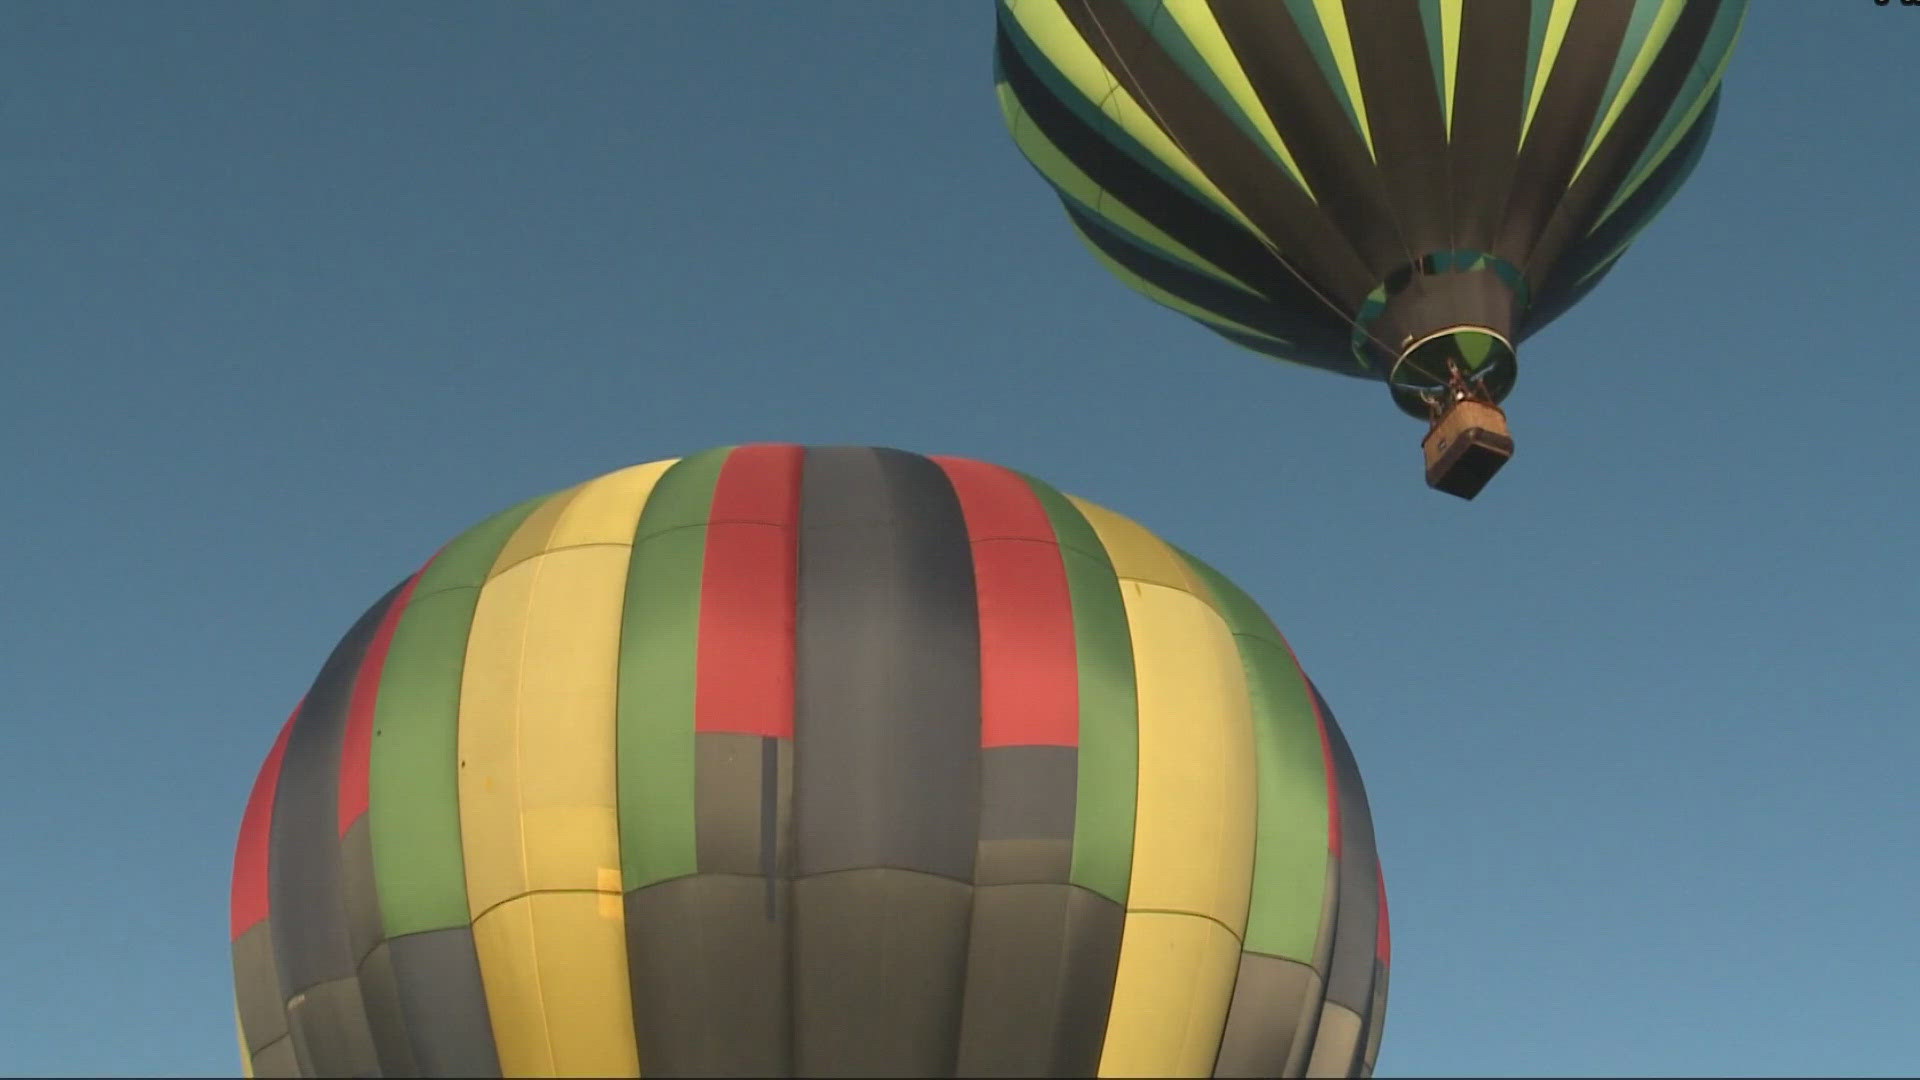 After an unexpected announcement that the Great Falls Balloon Festival would be canceled this year, Lewiston city officials stepped in to keep it afloat.